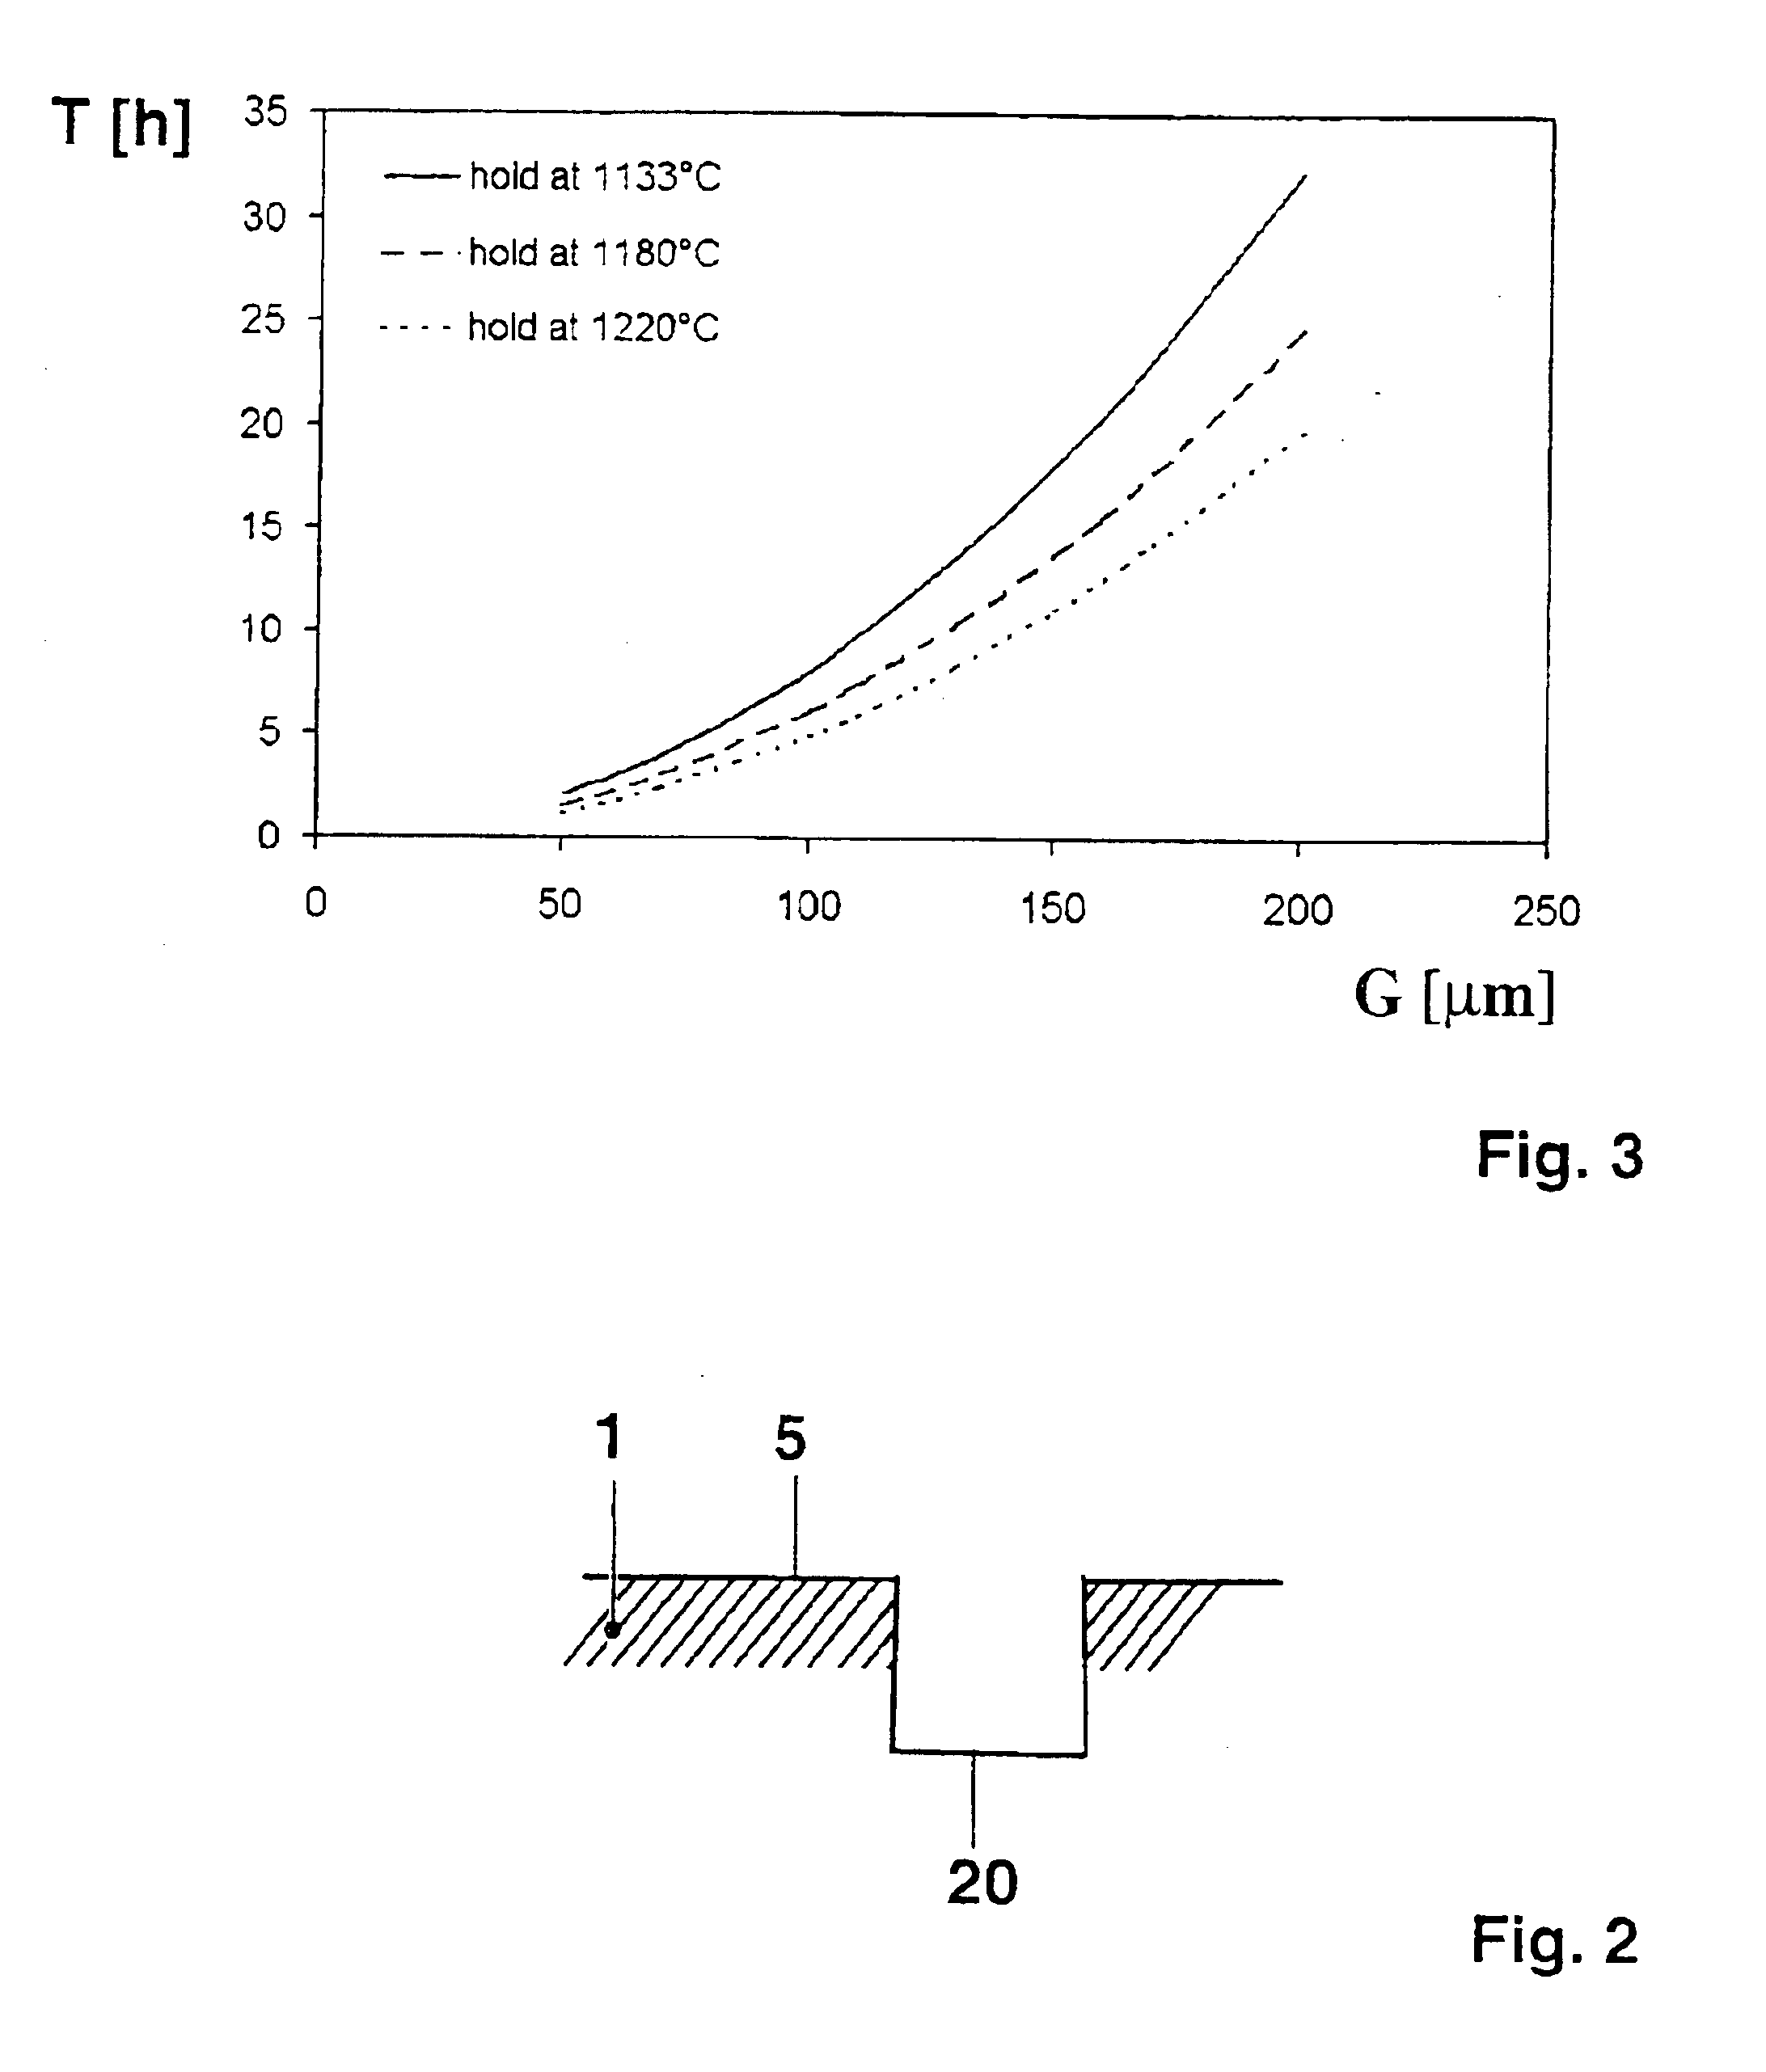 Method for fabricating, modifying or repairing of single crystal or directionally solidified articles